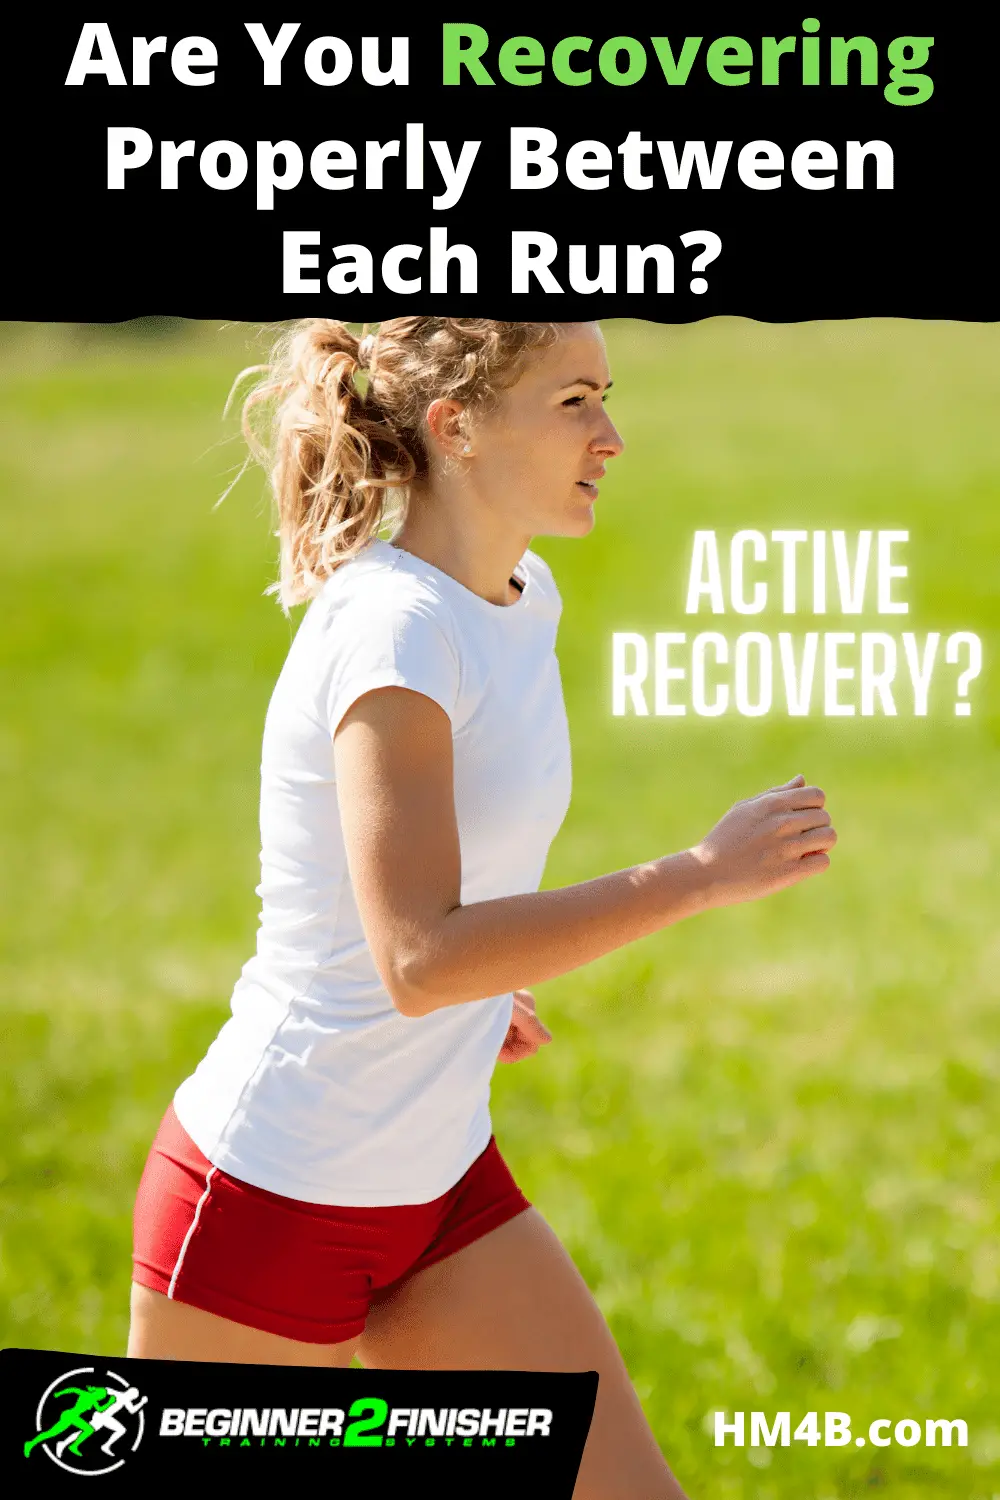 What Is The Difference Between Resting Recovery And Active Recovery?